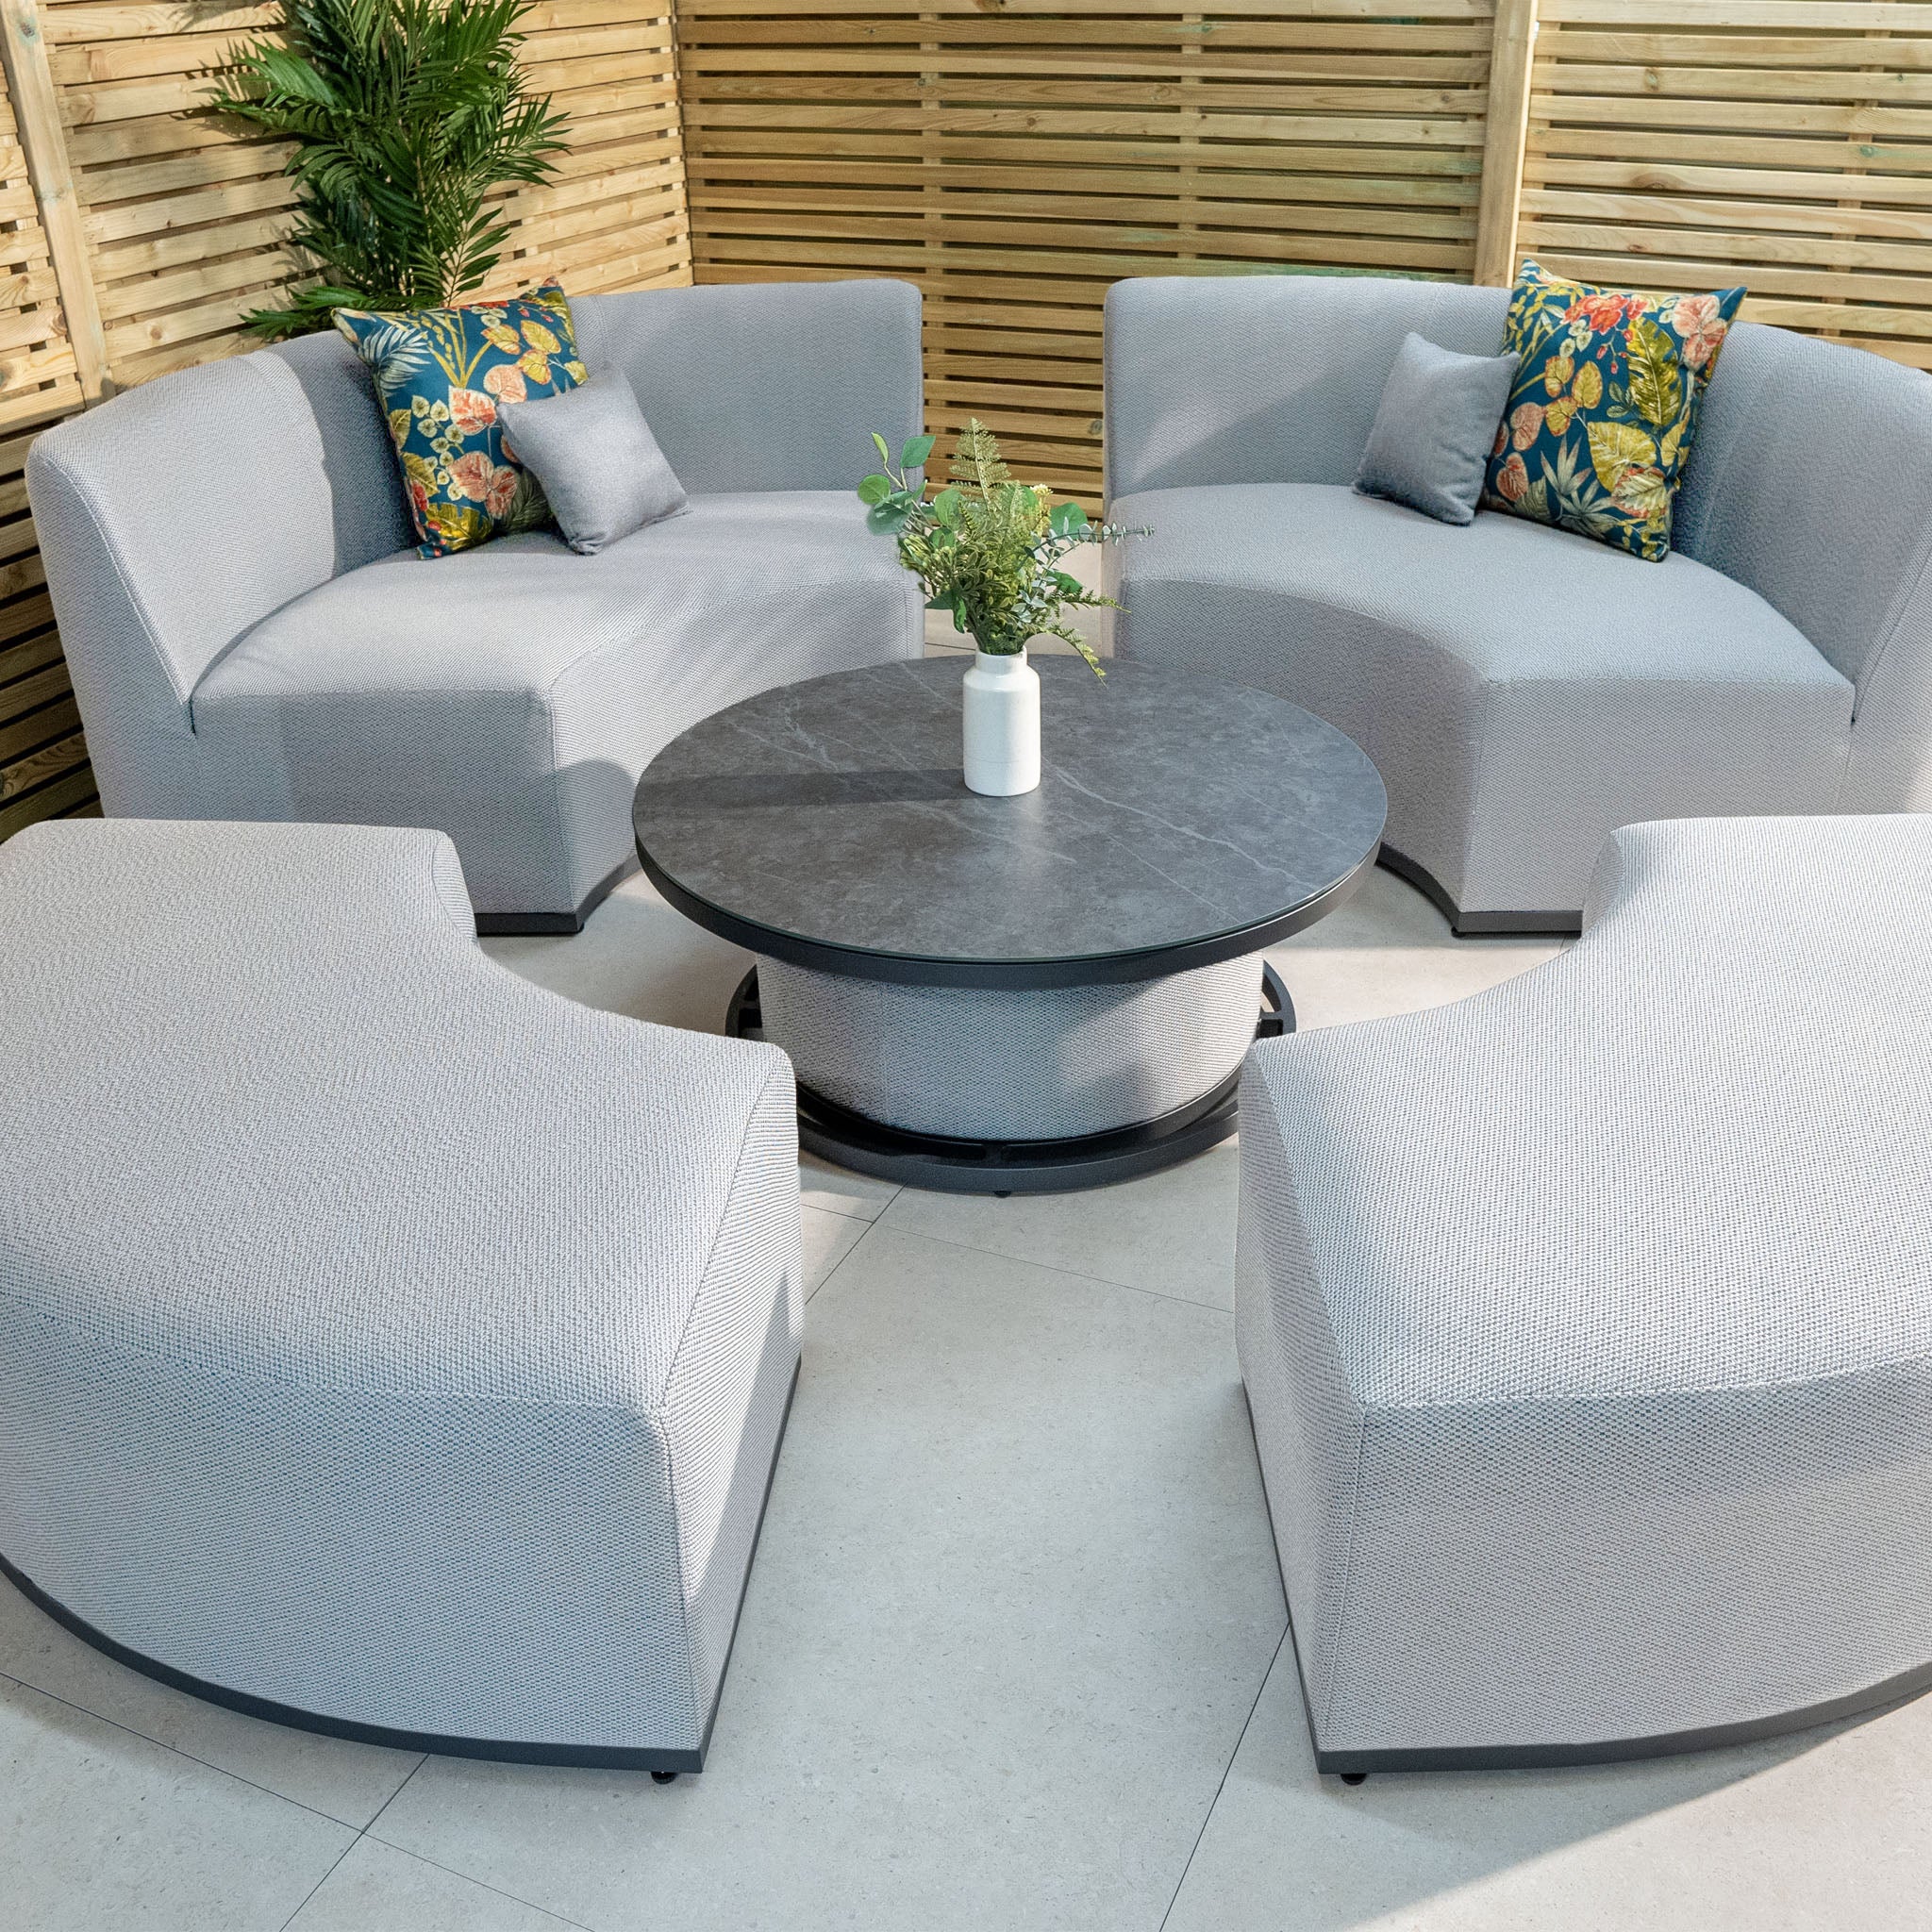 Luna Outdoor Fabric Lifestyle Suite with 2 Sofas and 2 Benches in Oyster Grey